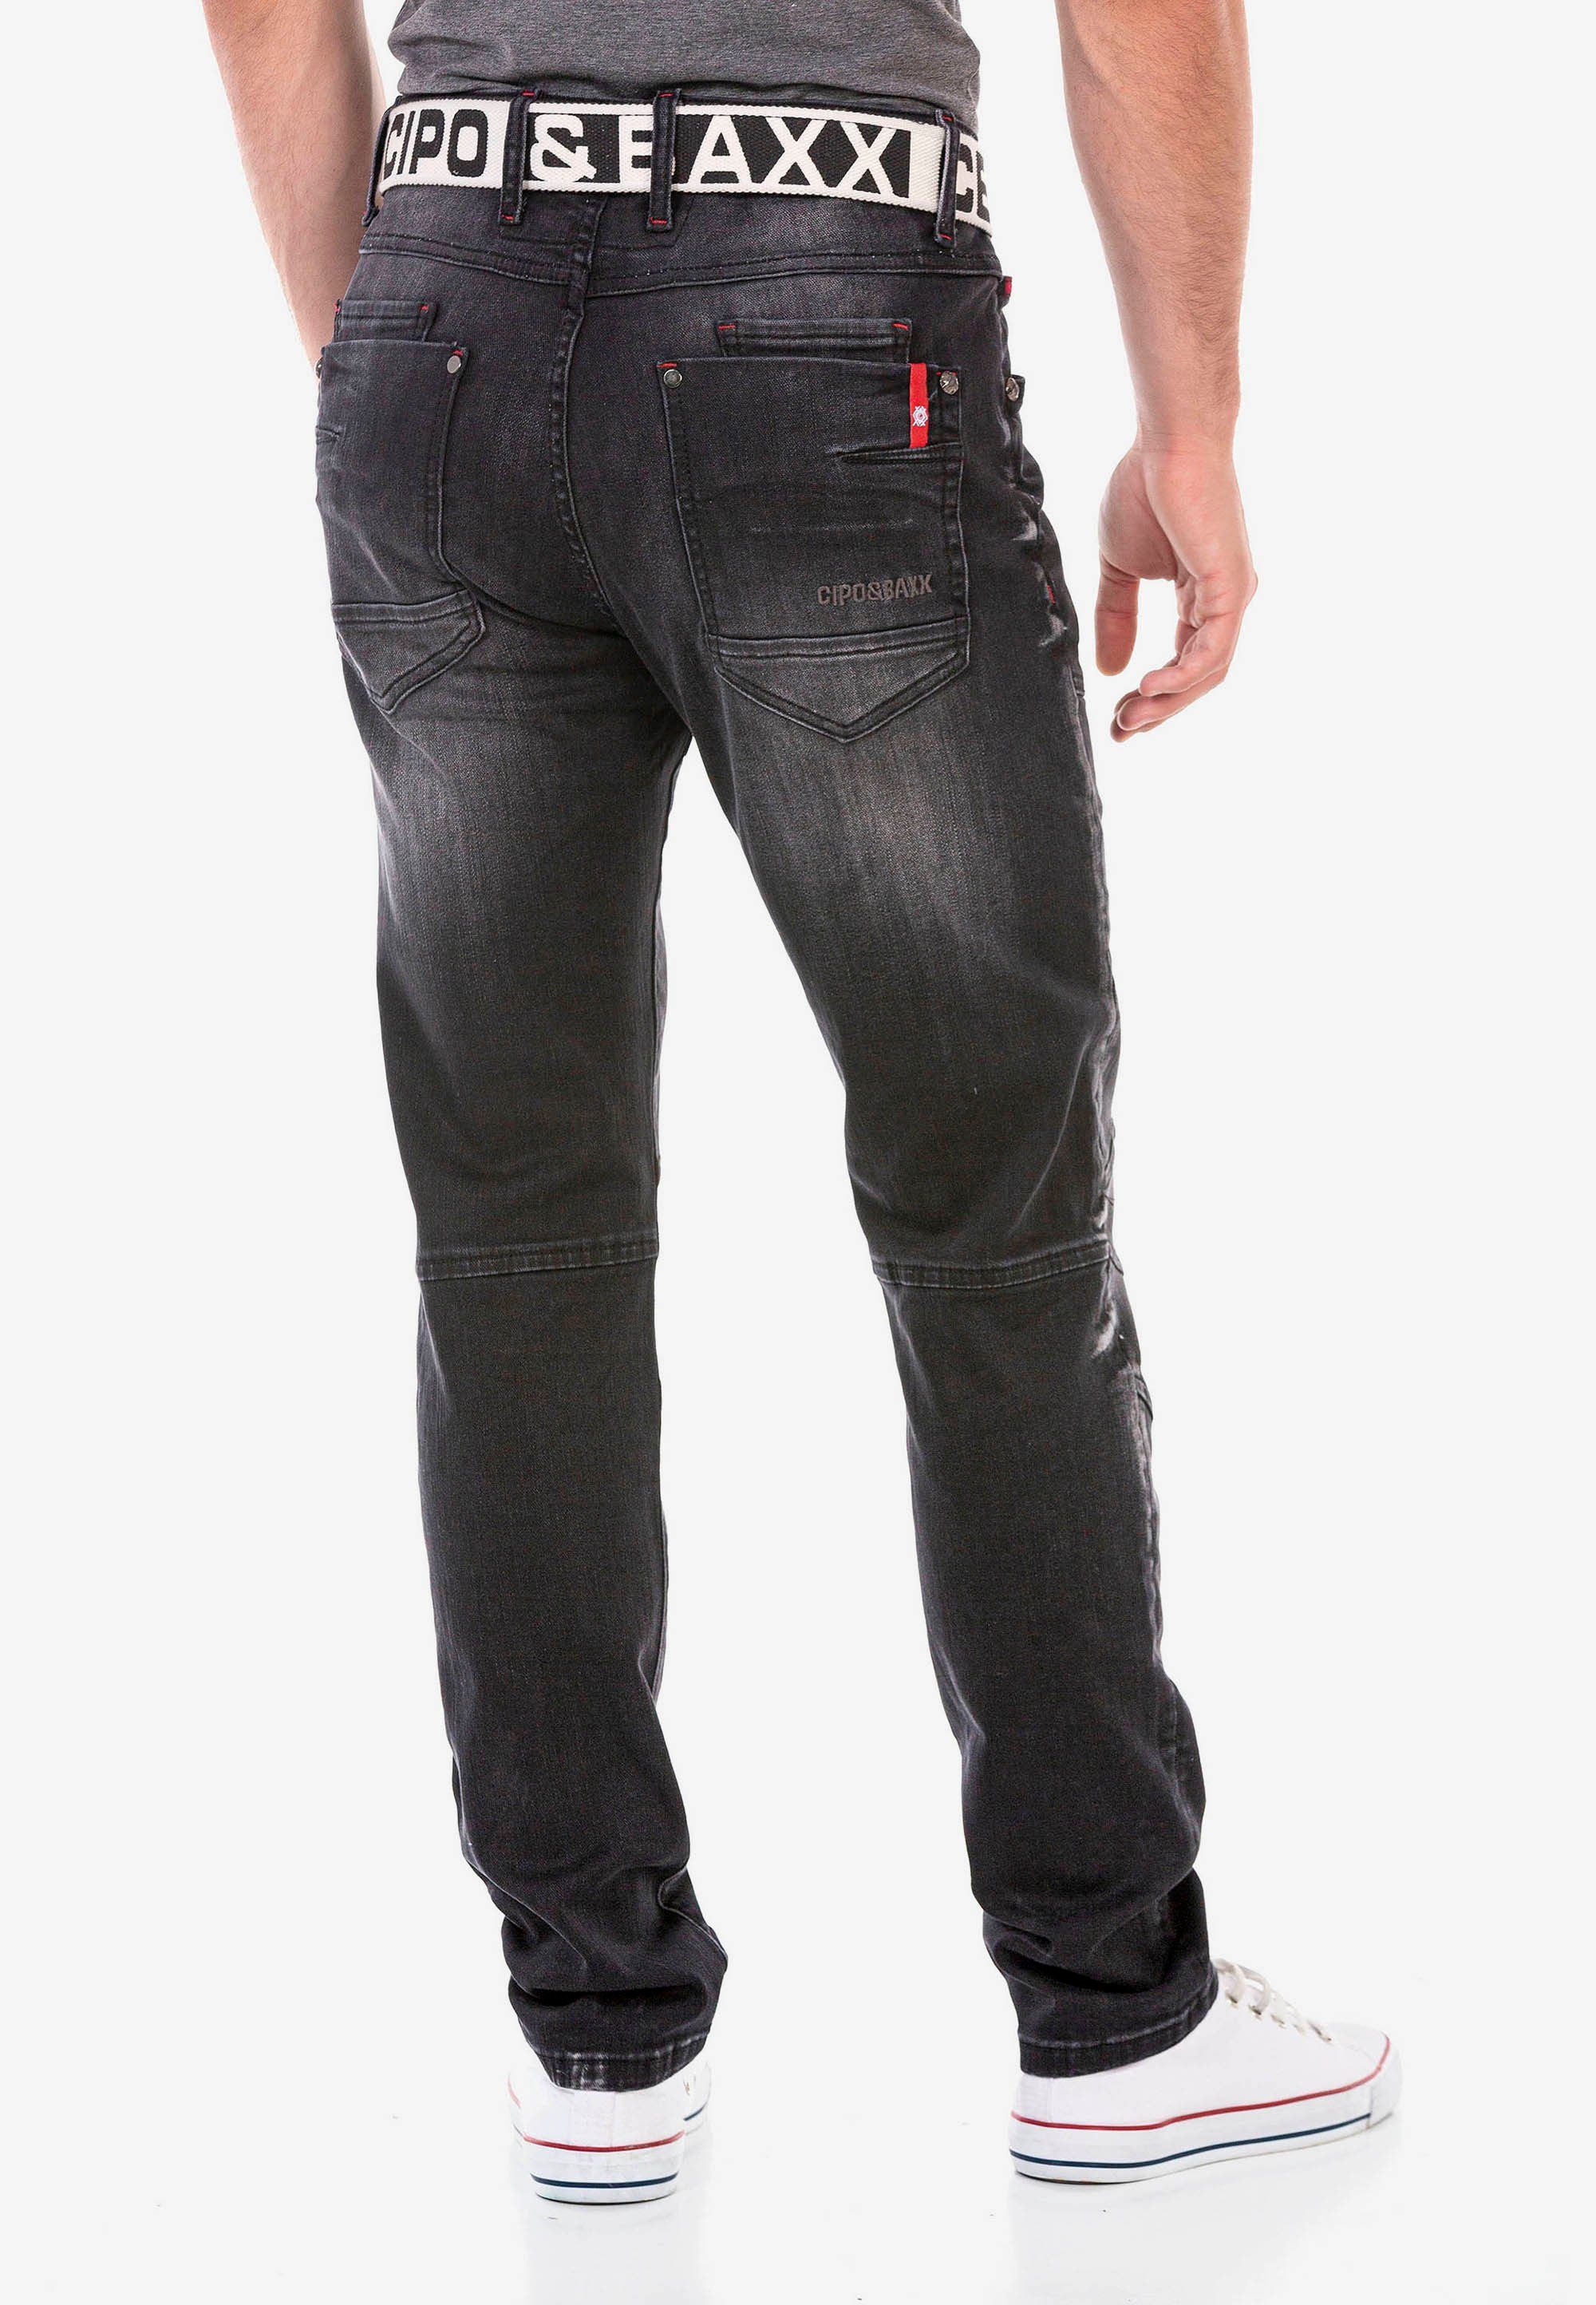 Cipo & Baxx Used-Waschung mit cooler Straight-Jeans